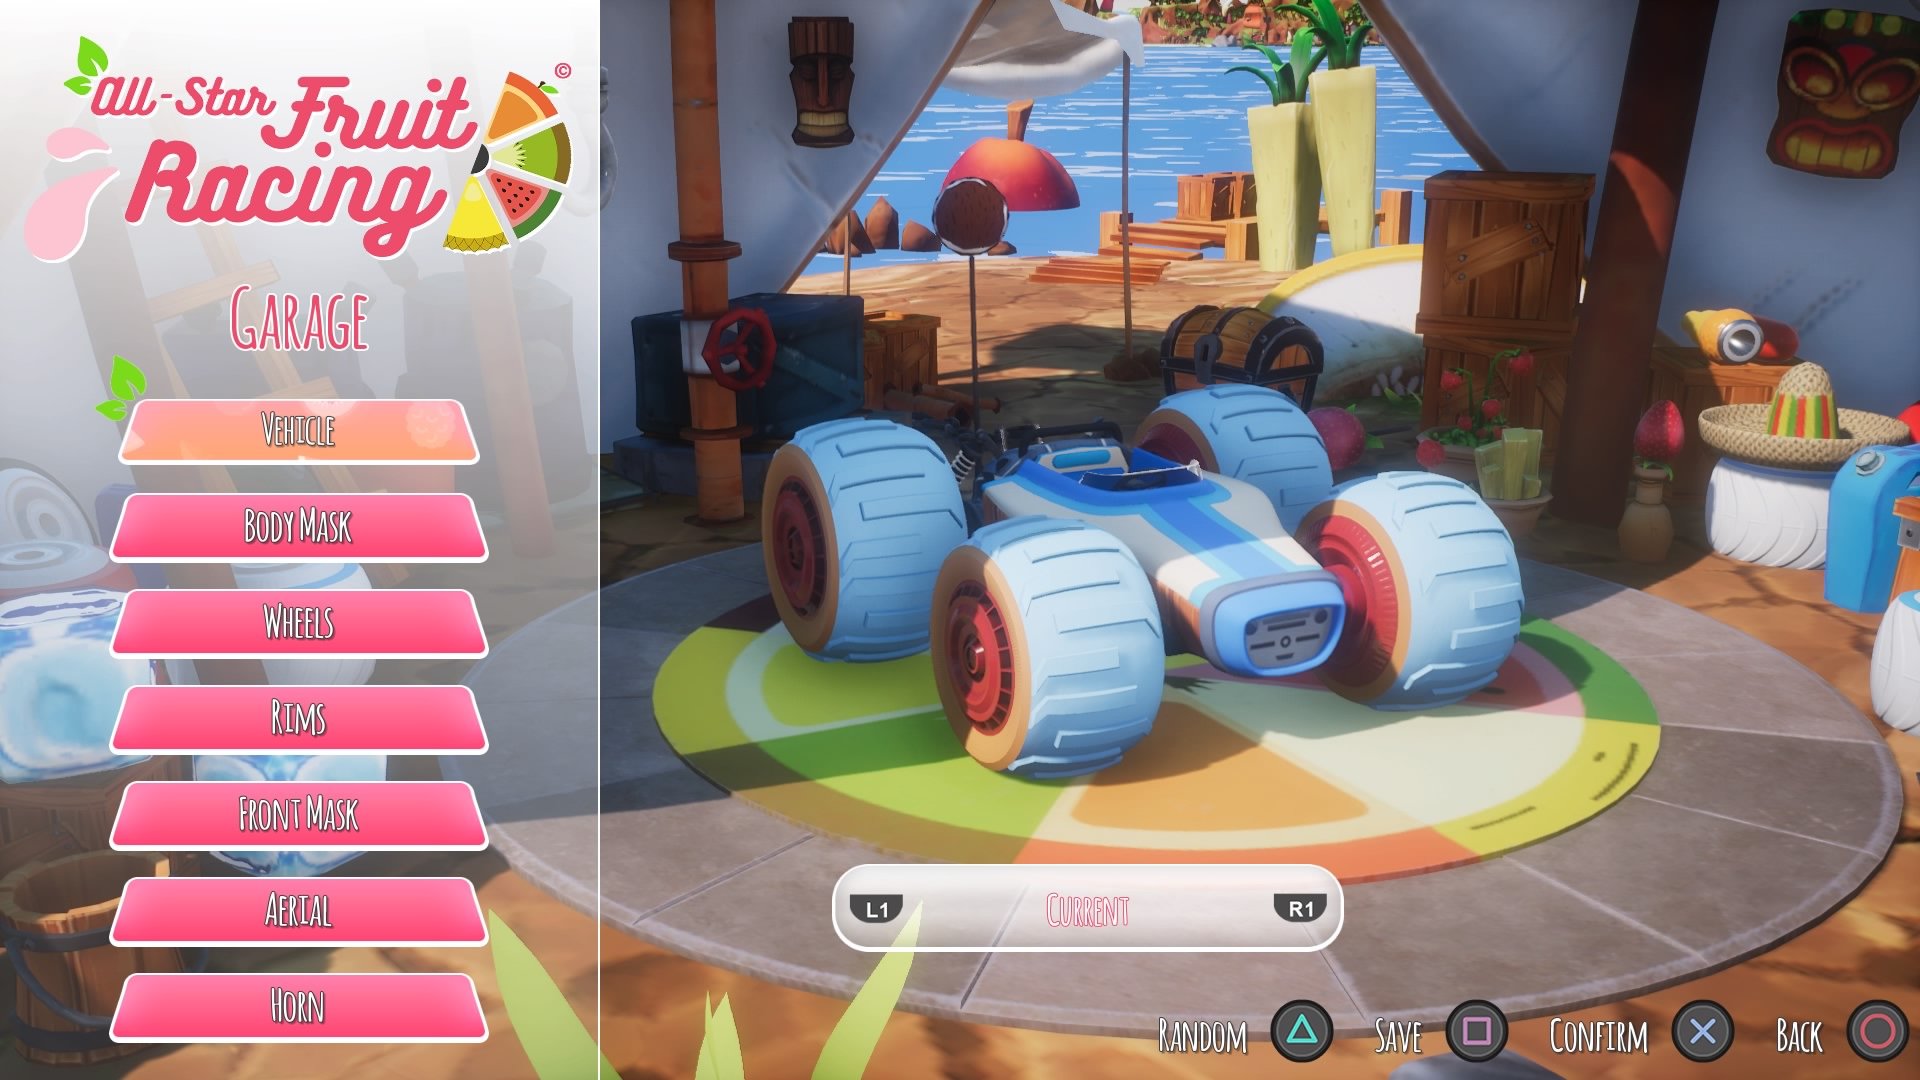 All-Star Fruit Racing PS4 Review